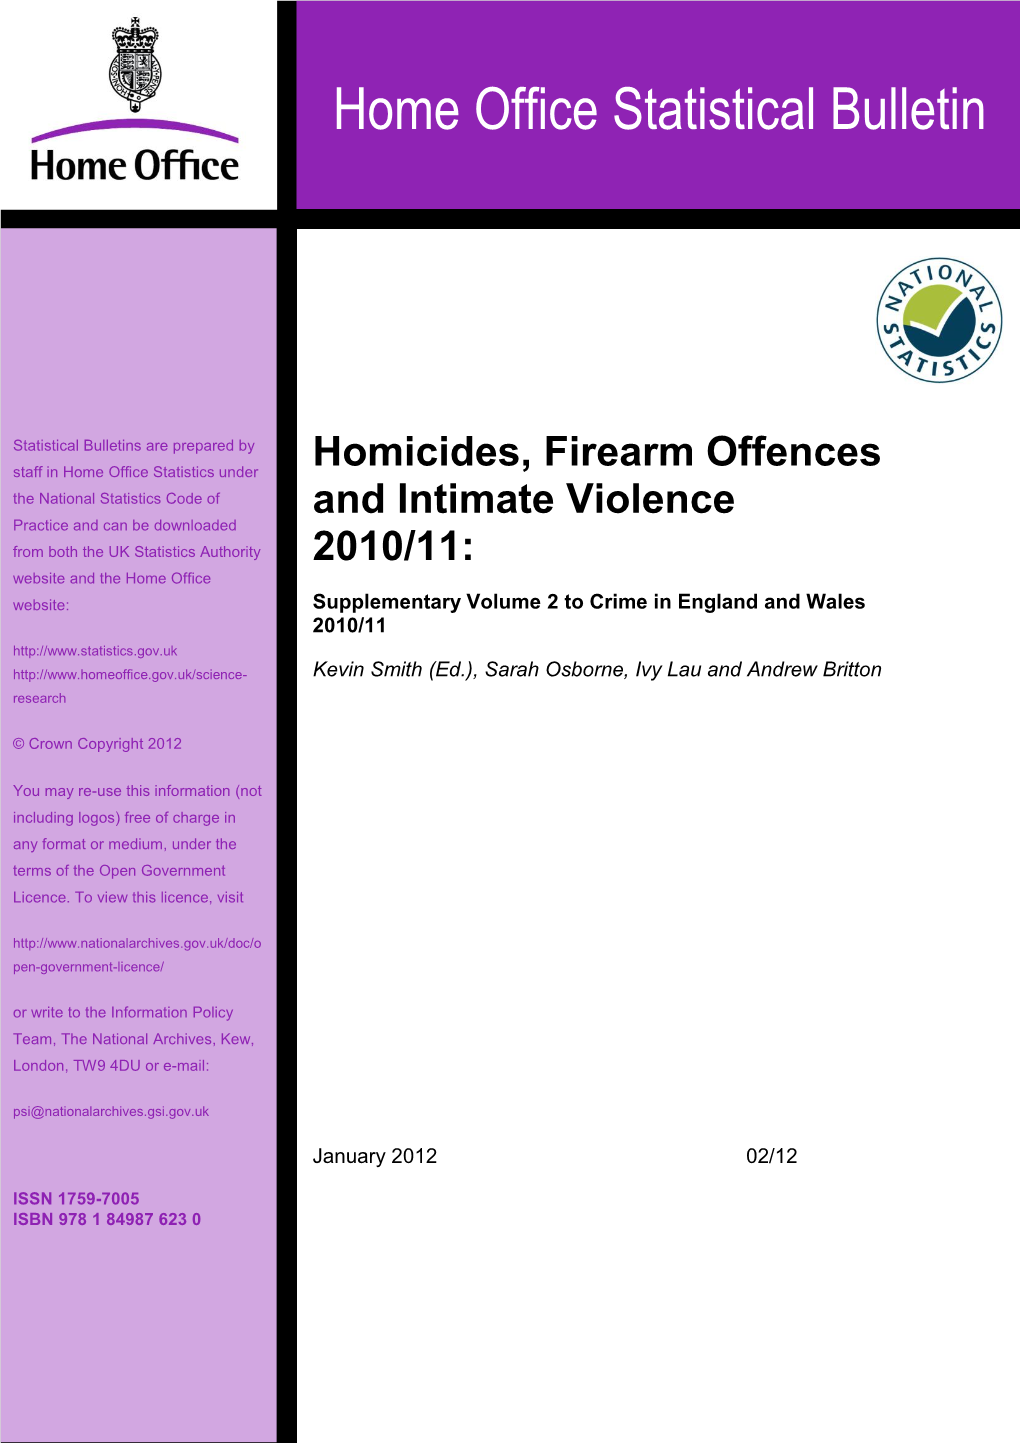 Homicides, Firearm Offences and Intimate Violence 2010/11